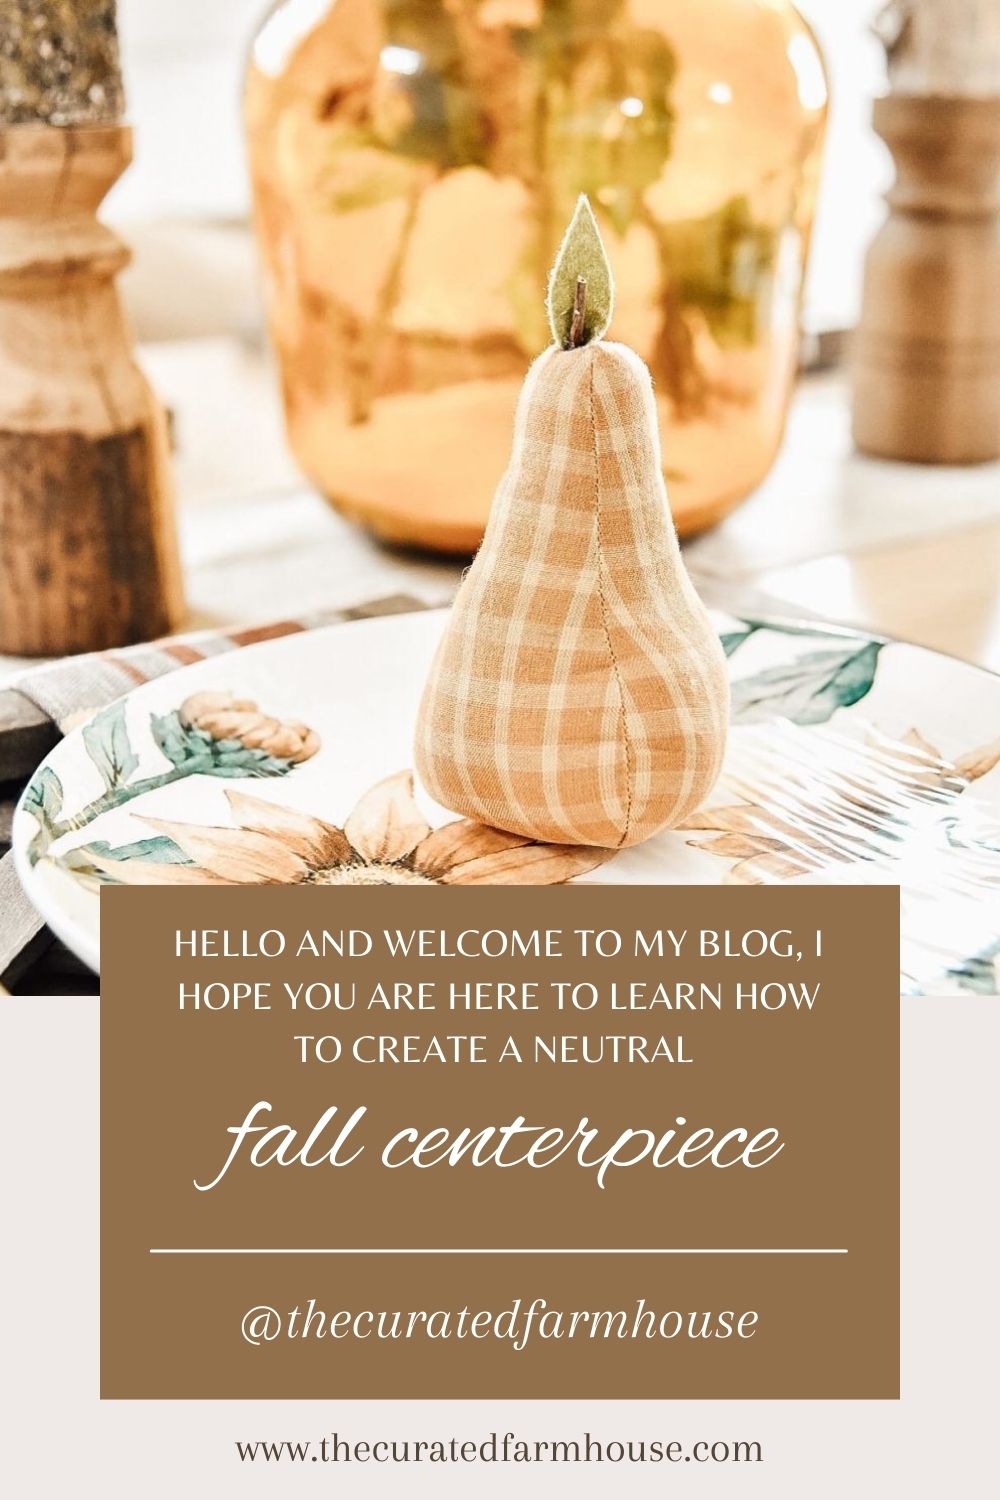 How to Create a Neutral Fall Centerpiece